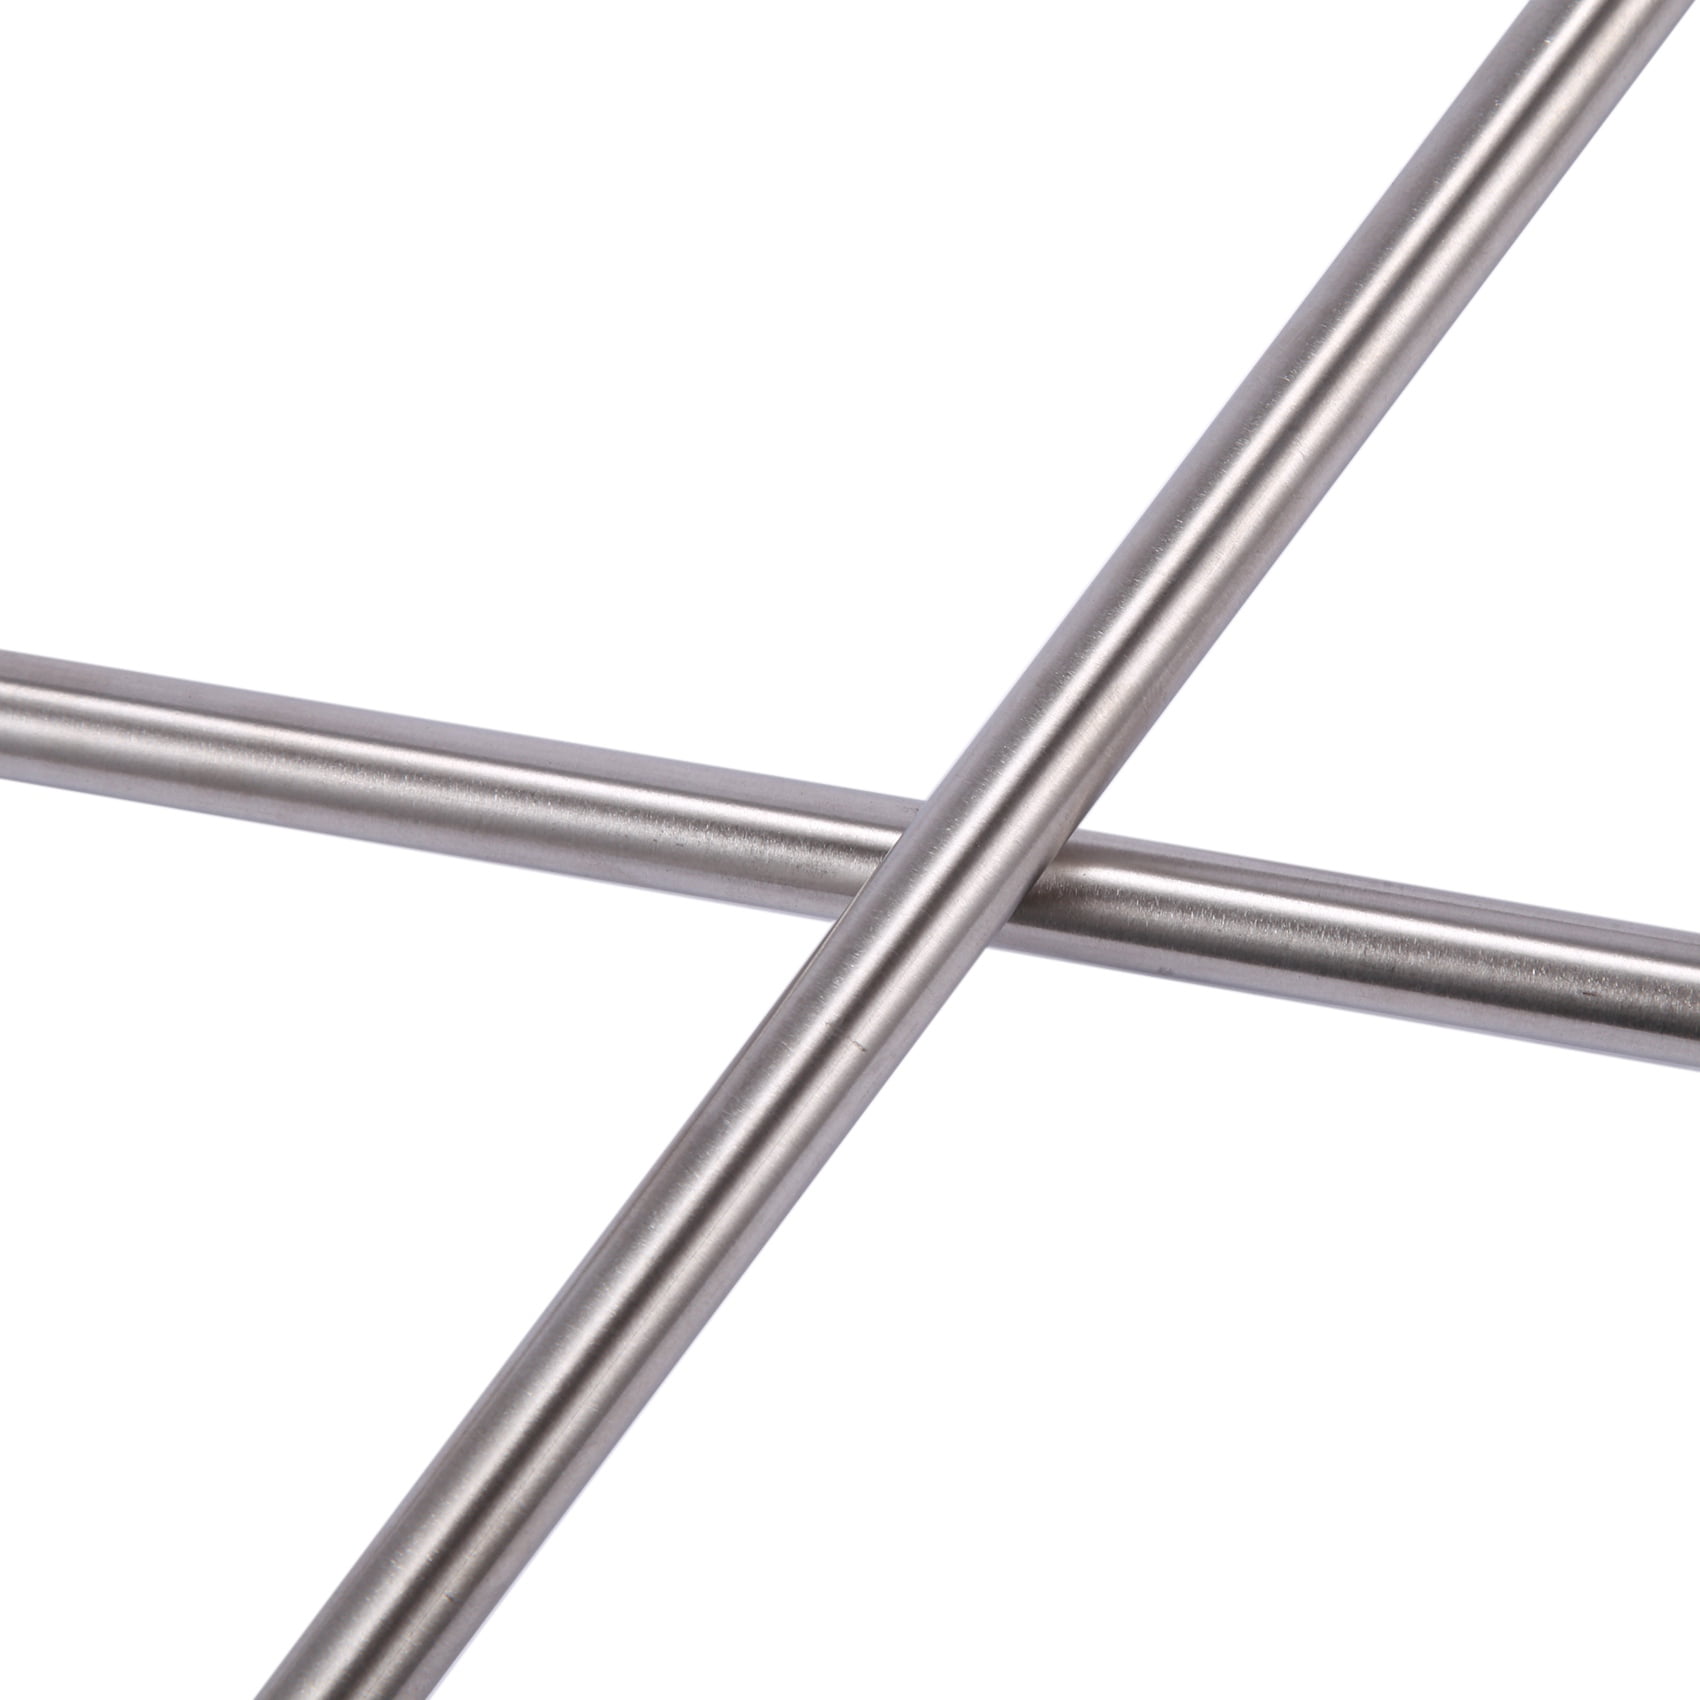 OD 10mm x 8mm ID Stainless Pipe 304 Stainless Steel Capillary Tube Length 500mm